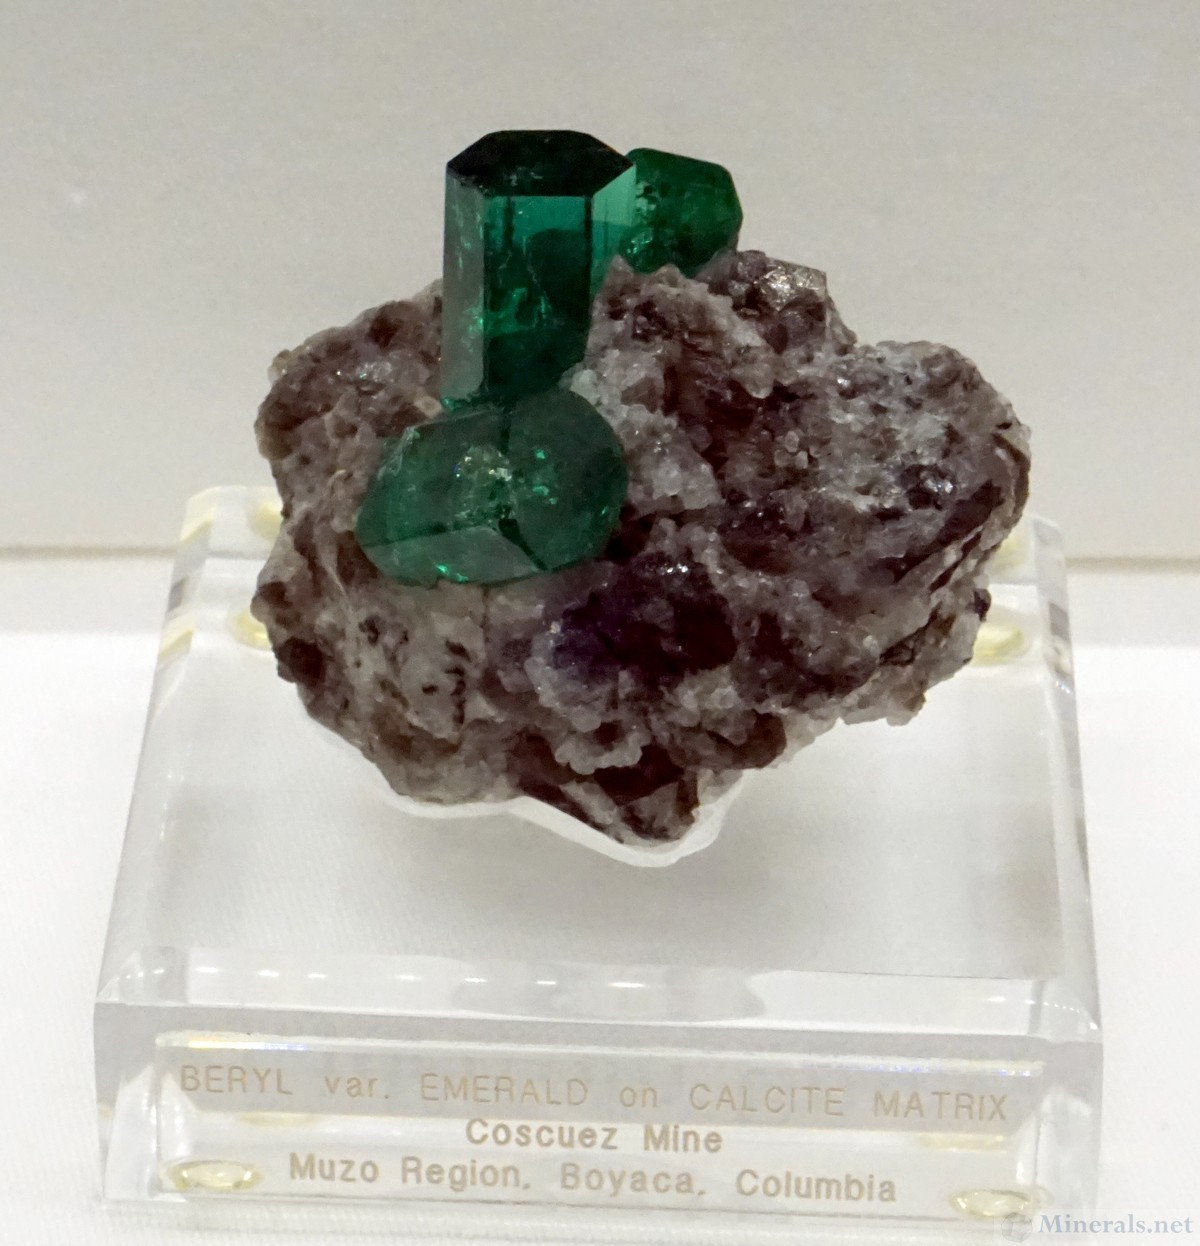 Emerald on Calcite Matrix from the Coscuez Mine, Boyaca, Colombia